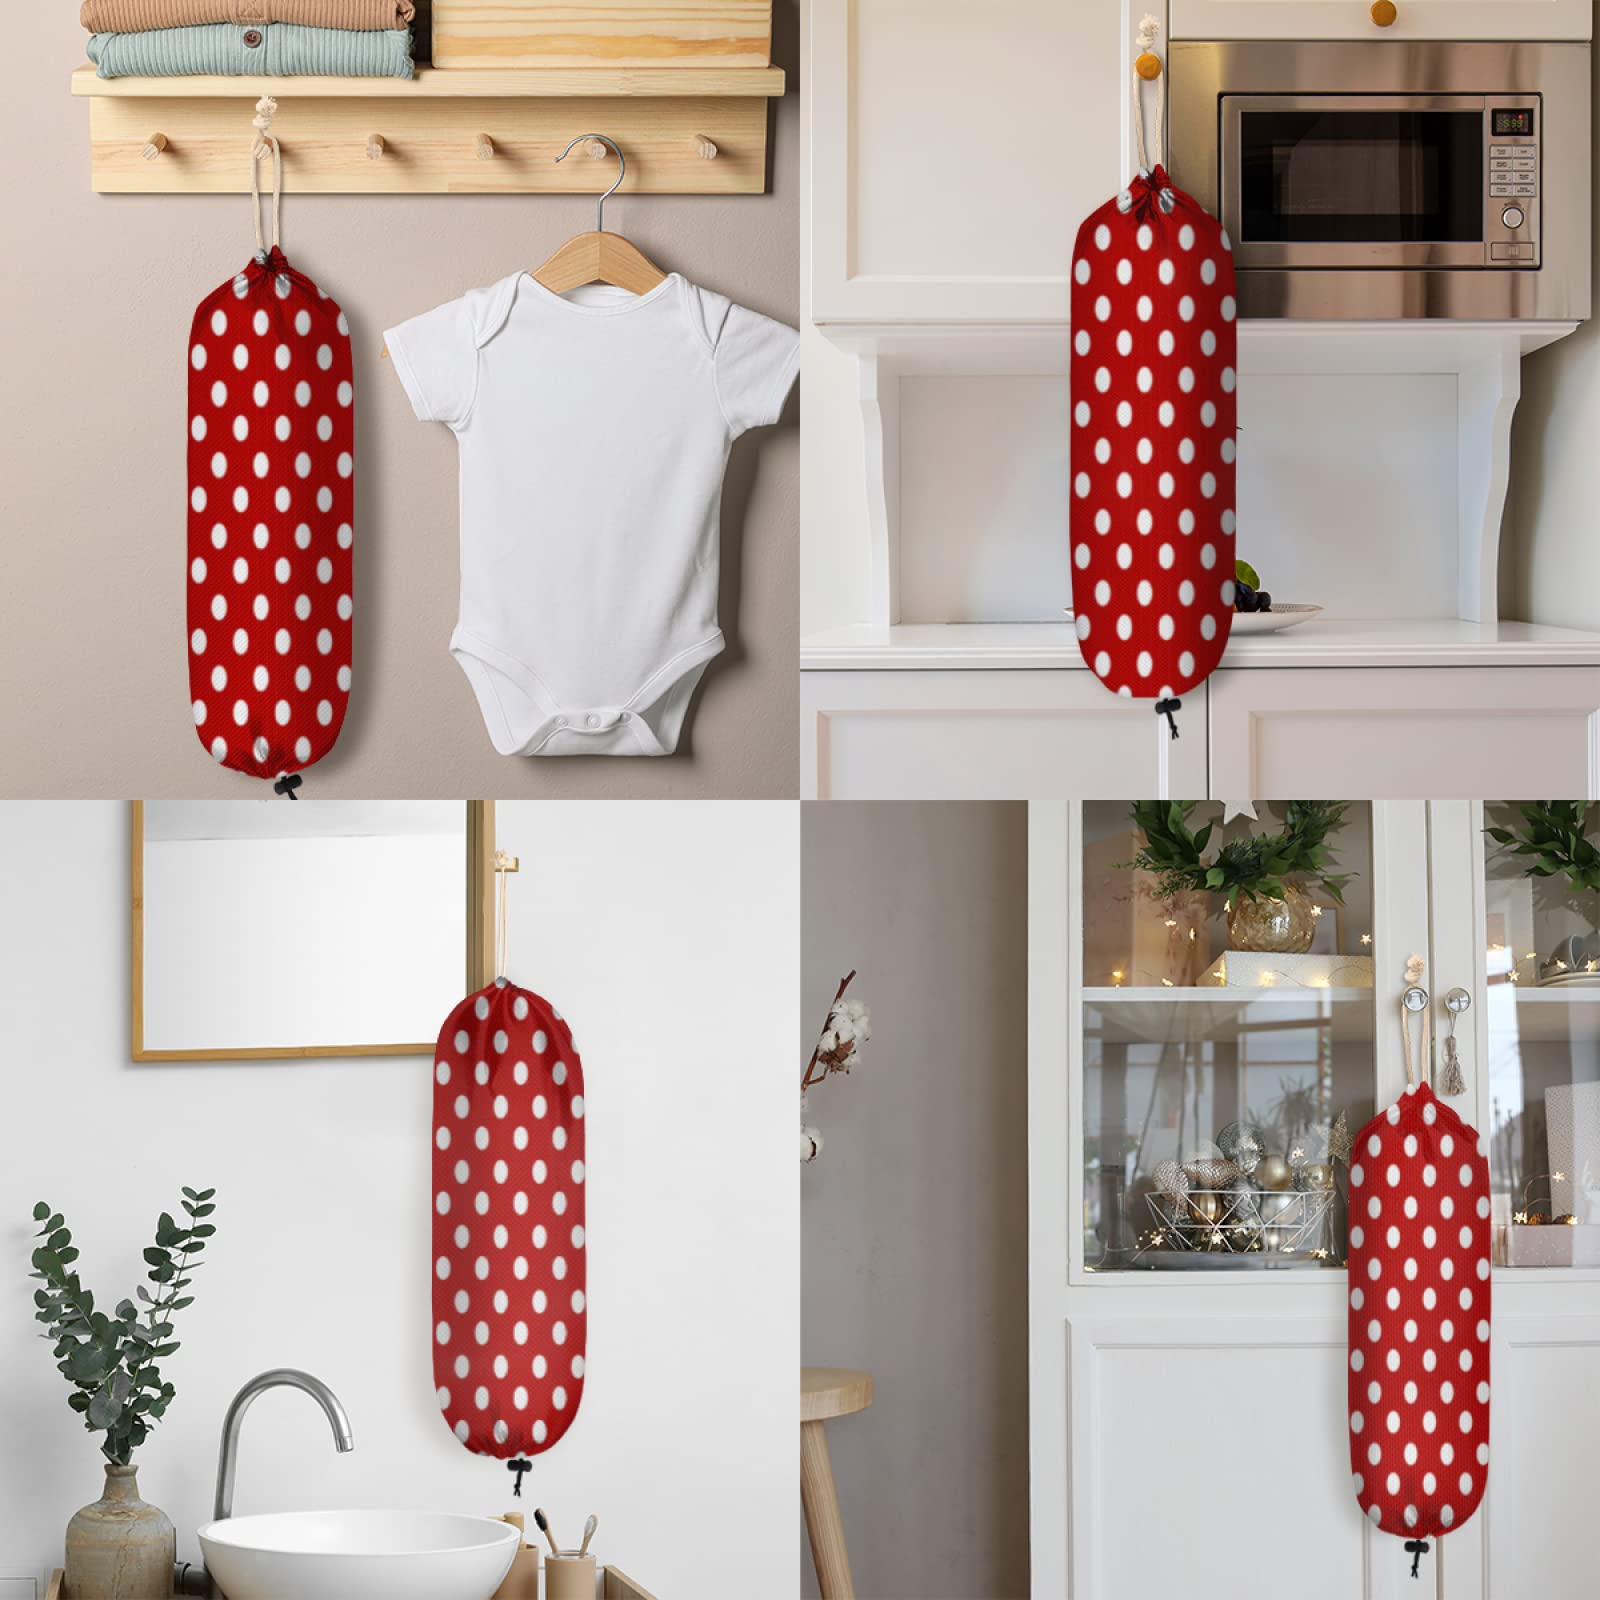 Polka Dot Red Plastic Bag Holder, Polka Dot Pattern Wall Mount Plastic Bag Organizer with Drawstring Grocery Shopping Bags Storage Dispenser for Home Kitchen Farmhouse Decor, 22X9 Inch